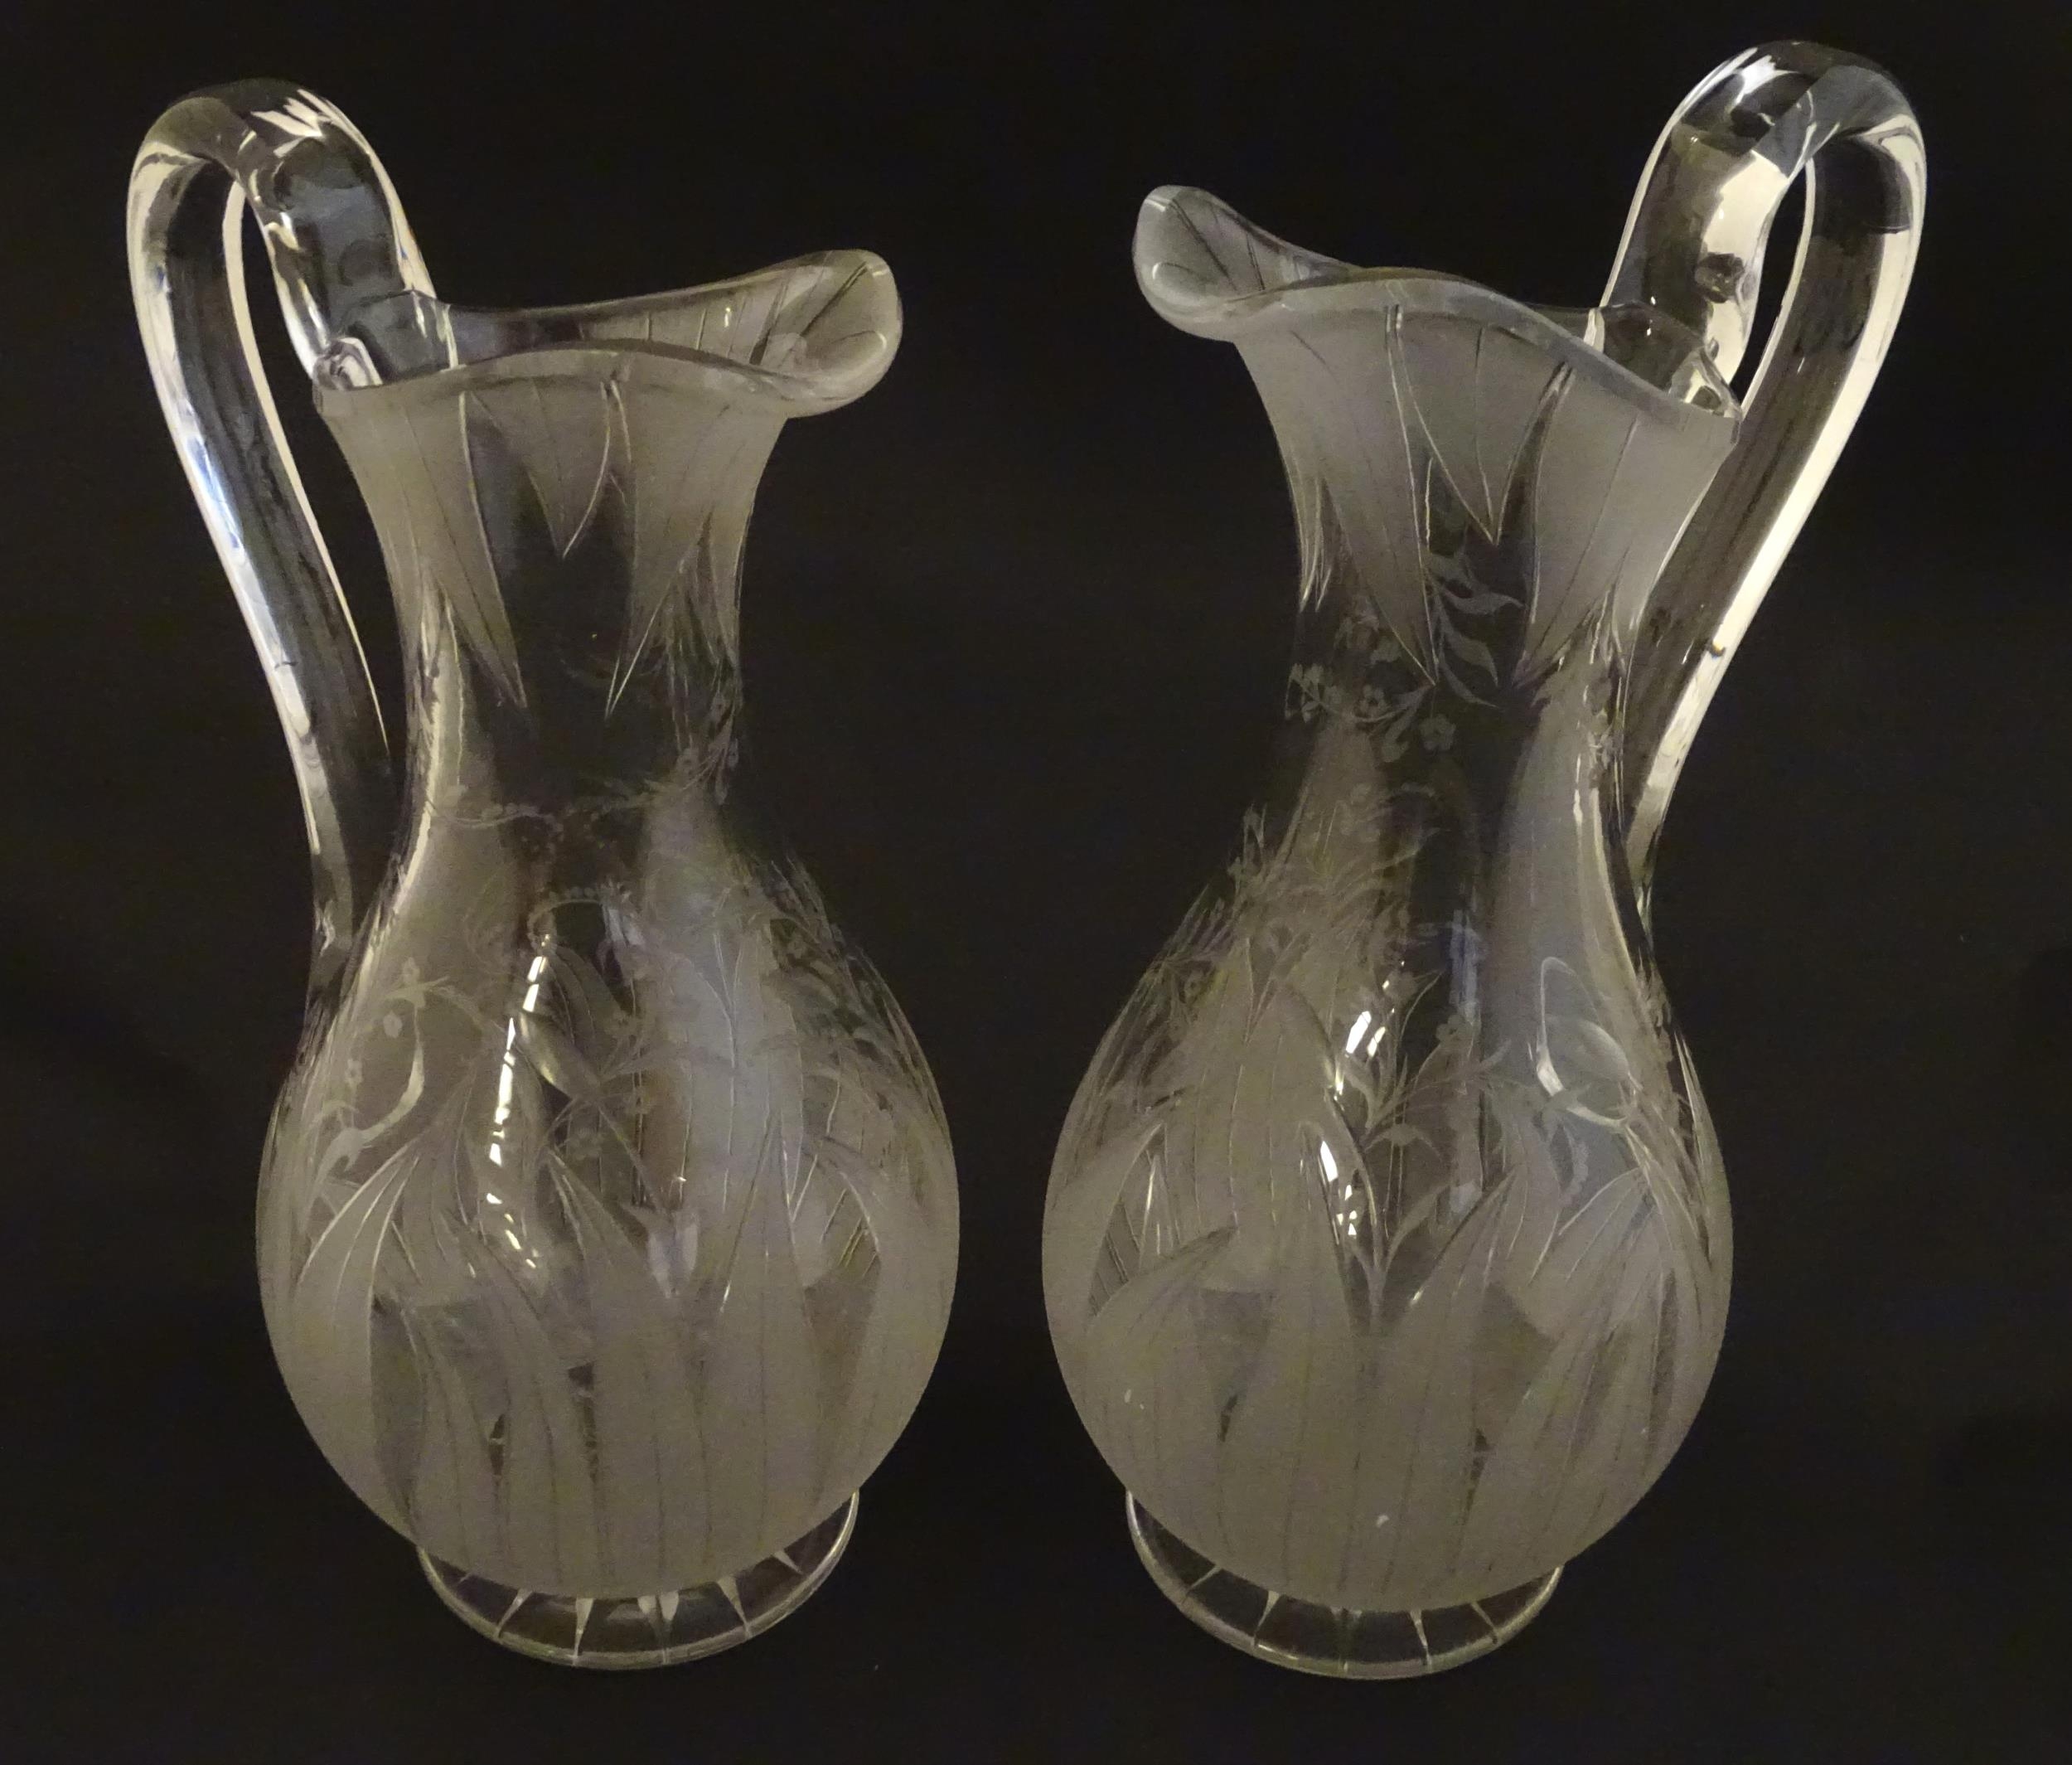 A pair of 19thC jugs with etched decoration depicting floral and foliate detail probably by